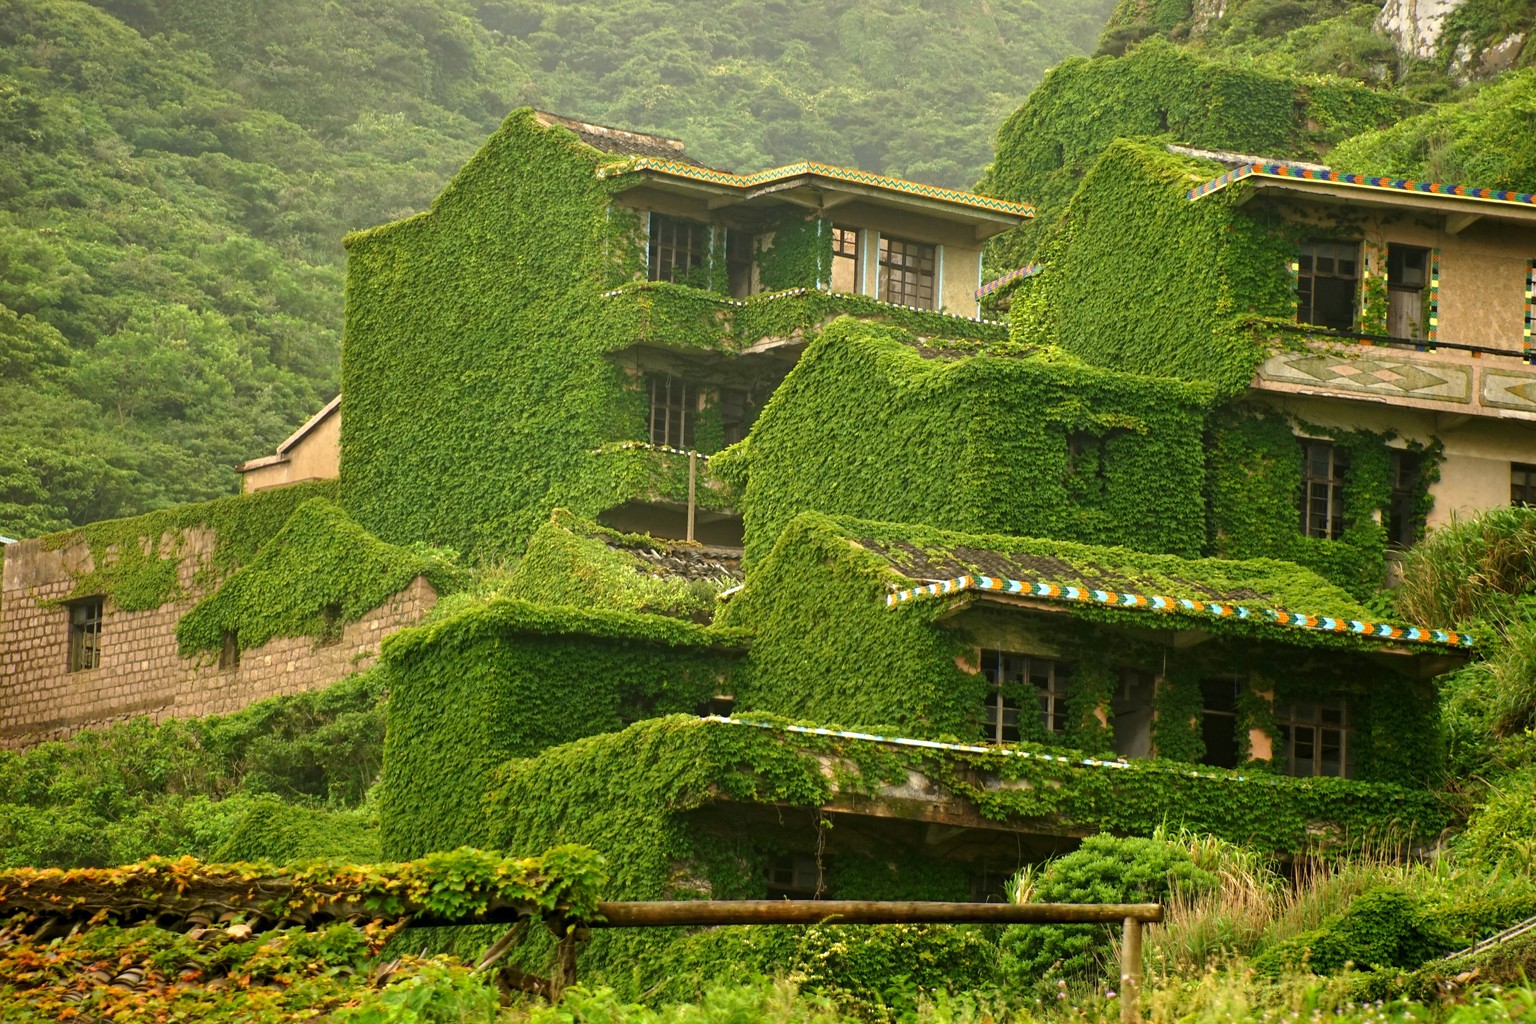 ZHOUSHAN, CHINA - MAY 31: (CHINA OUT) Houses are covered with creepers at a deserted village on Shengshan Island on May 31, 2015 in Zhoushan, China. (Photo by ChinaFotoPress/ChinaFotoPress via Getty I ...